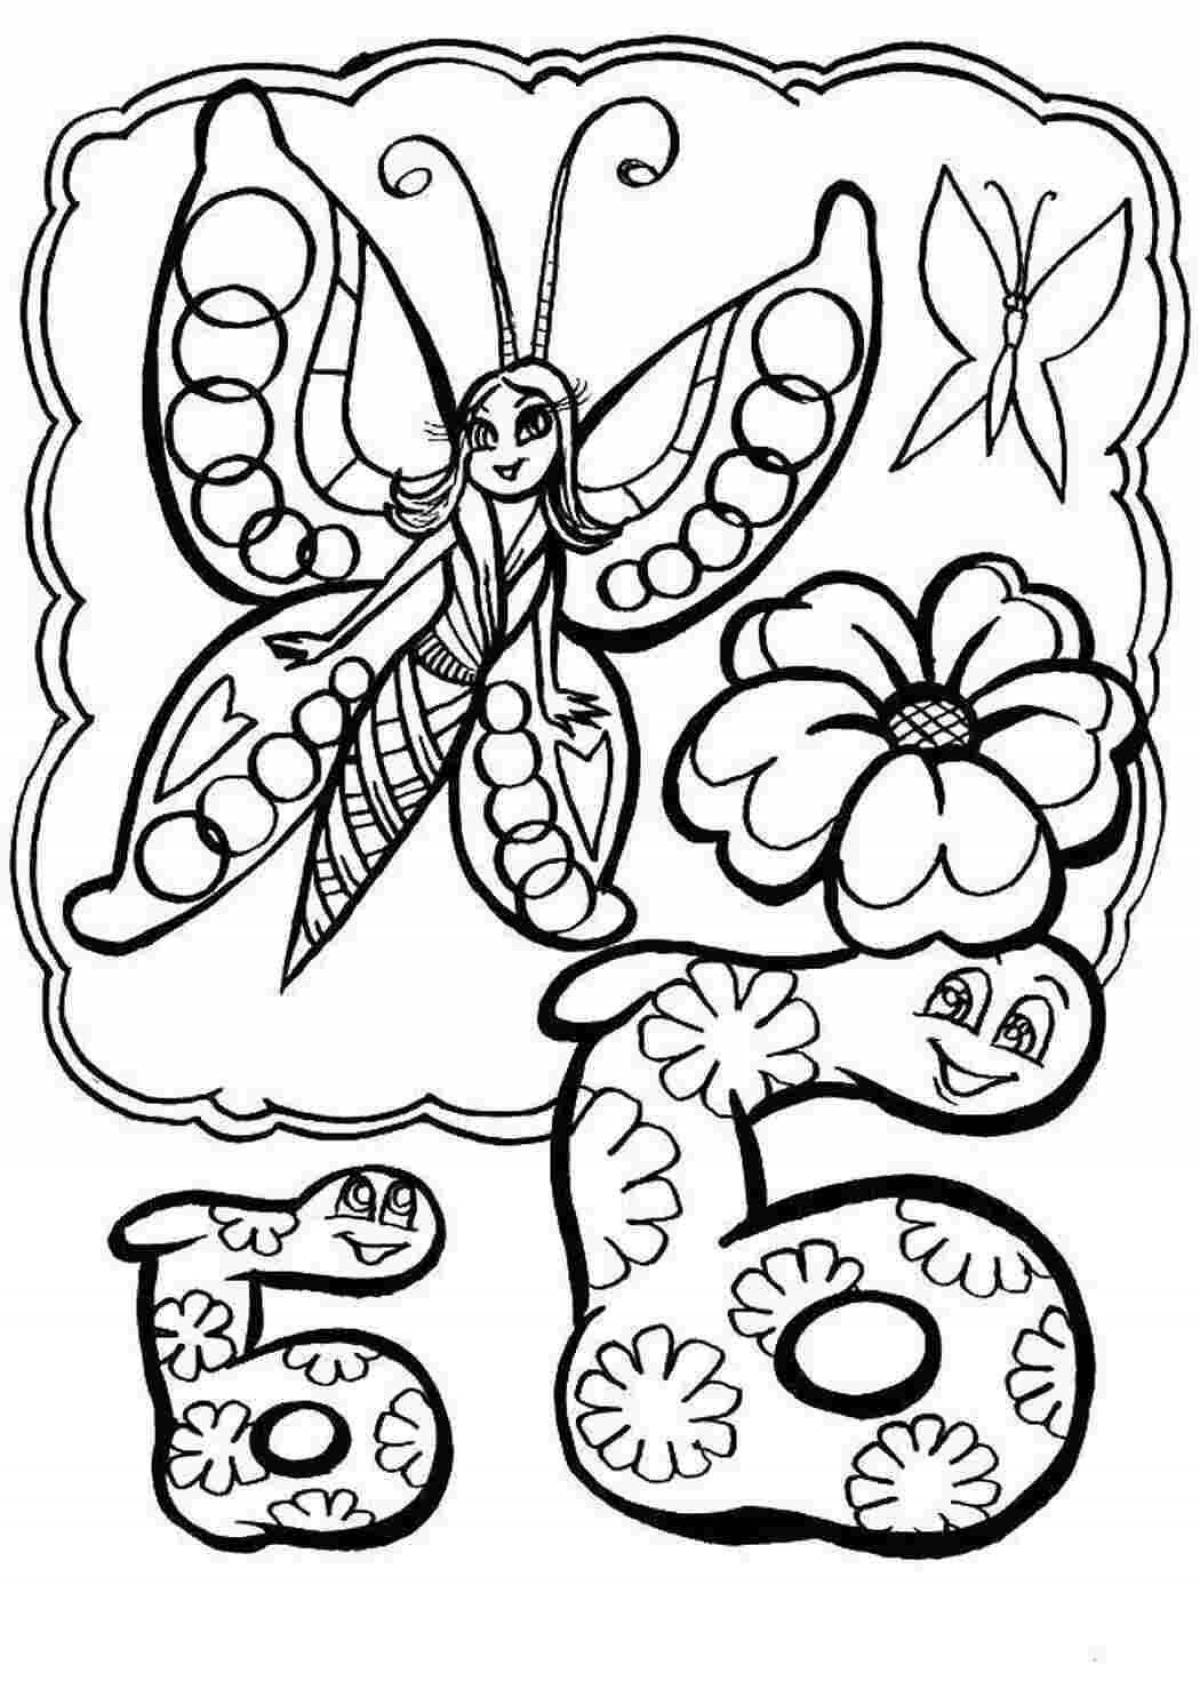 Playful coloring book for girls with letters